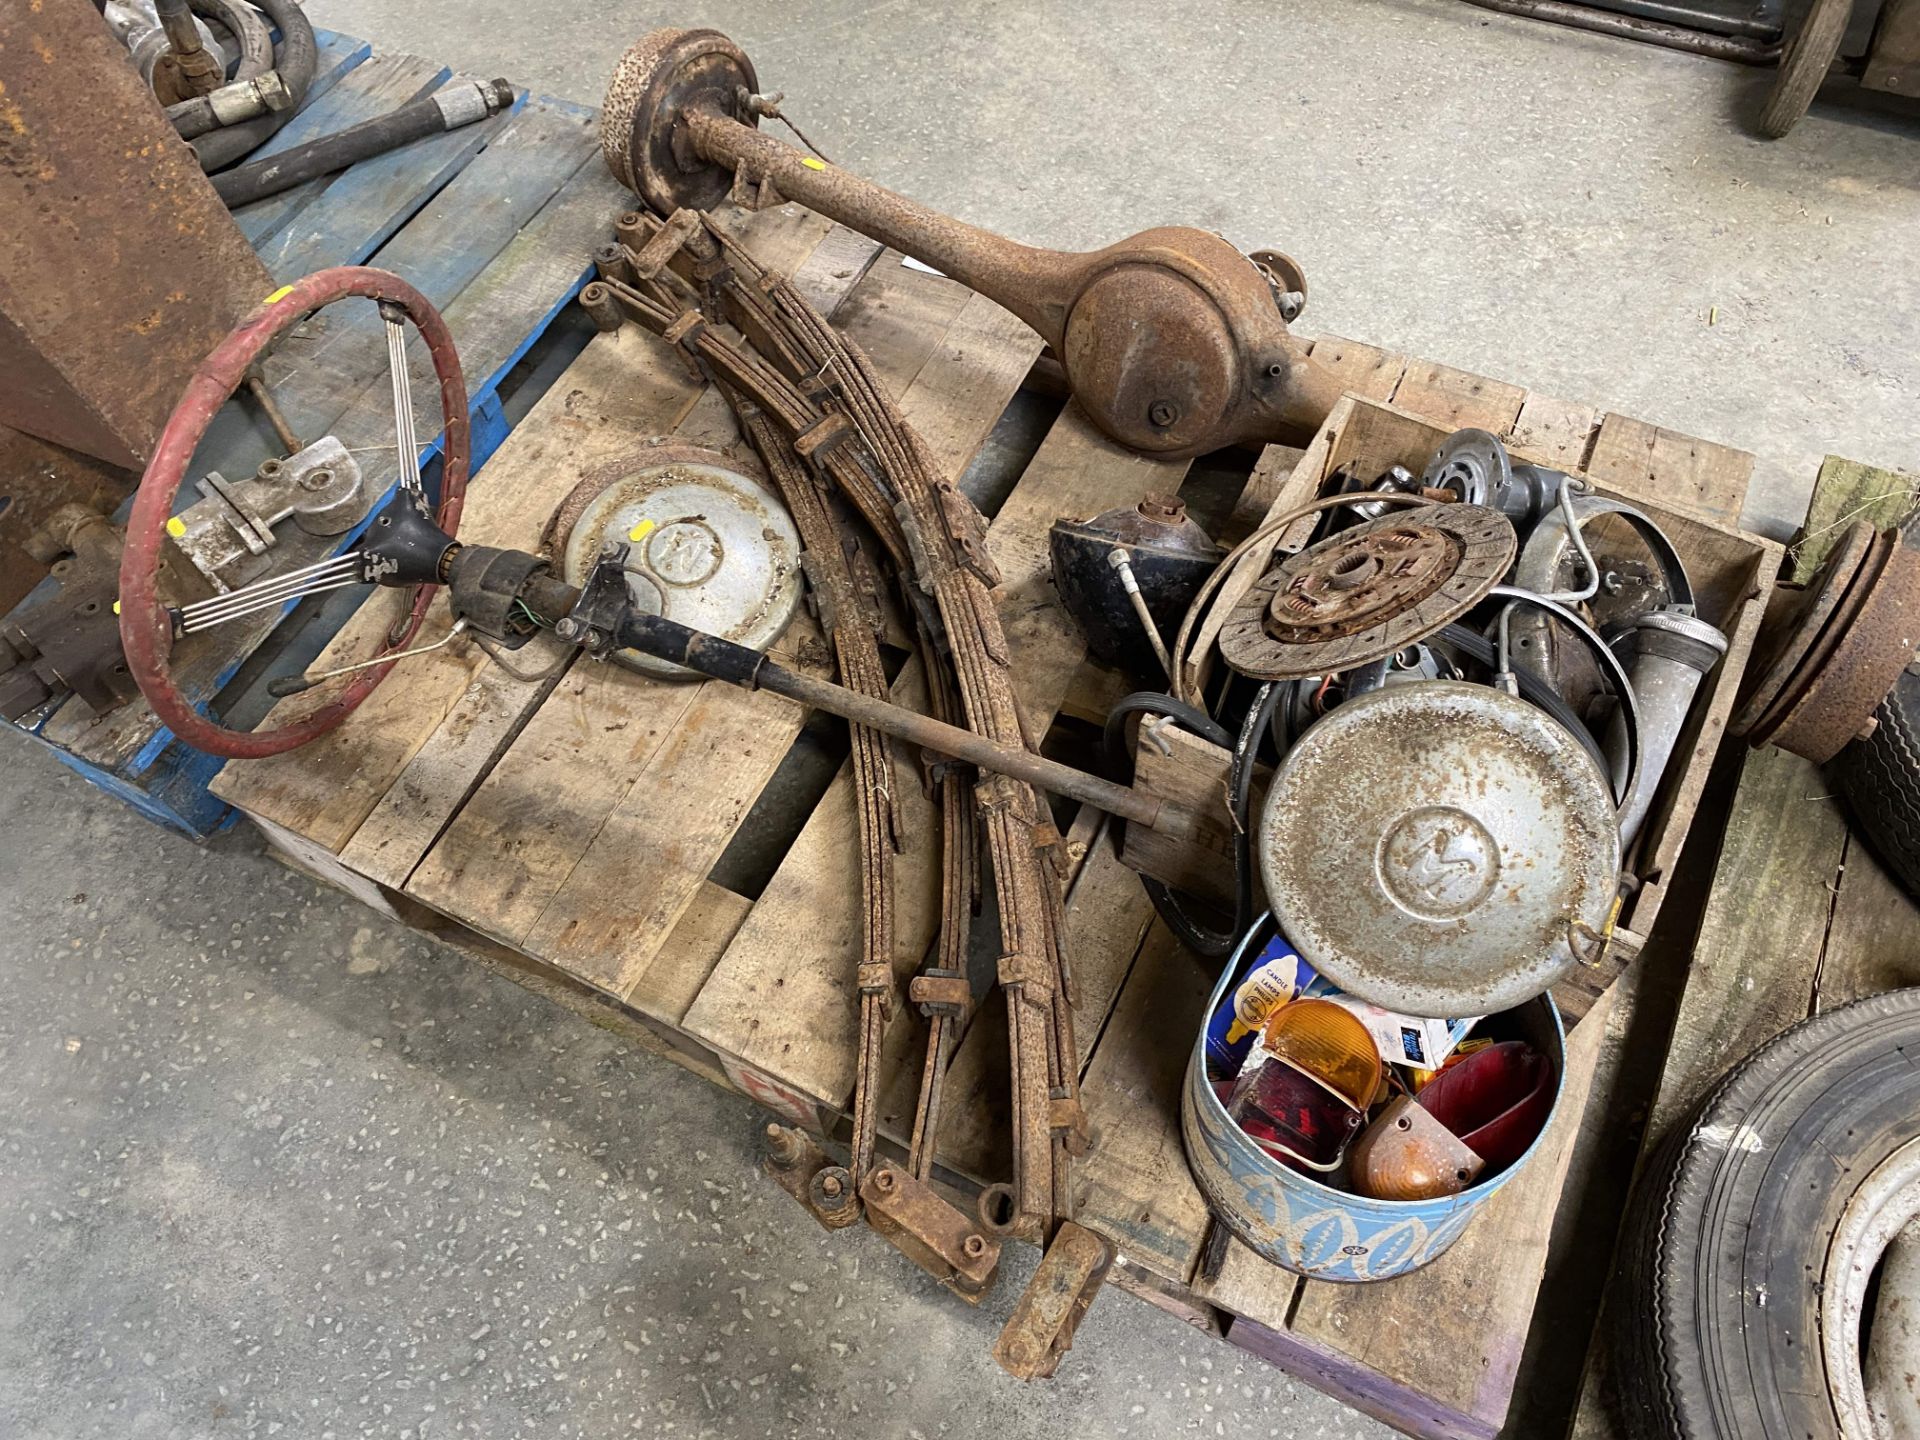 Morris Minor rear axle, clutch, springs, wheels and tyres and various spares. - Image 3 of 5